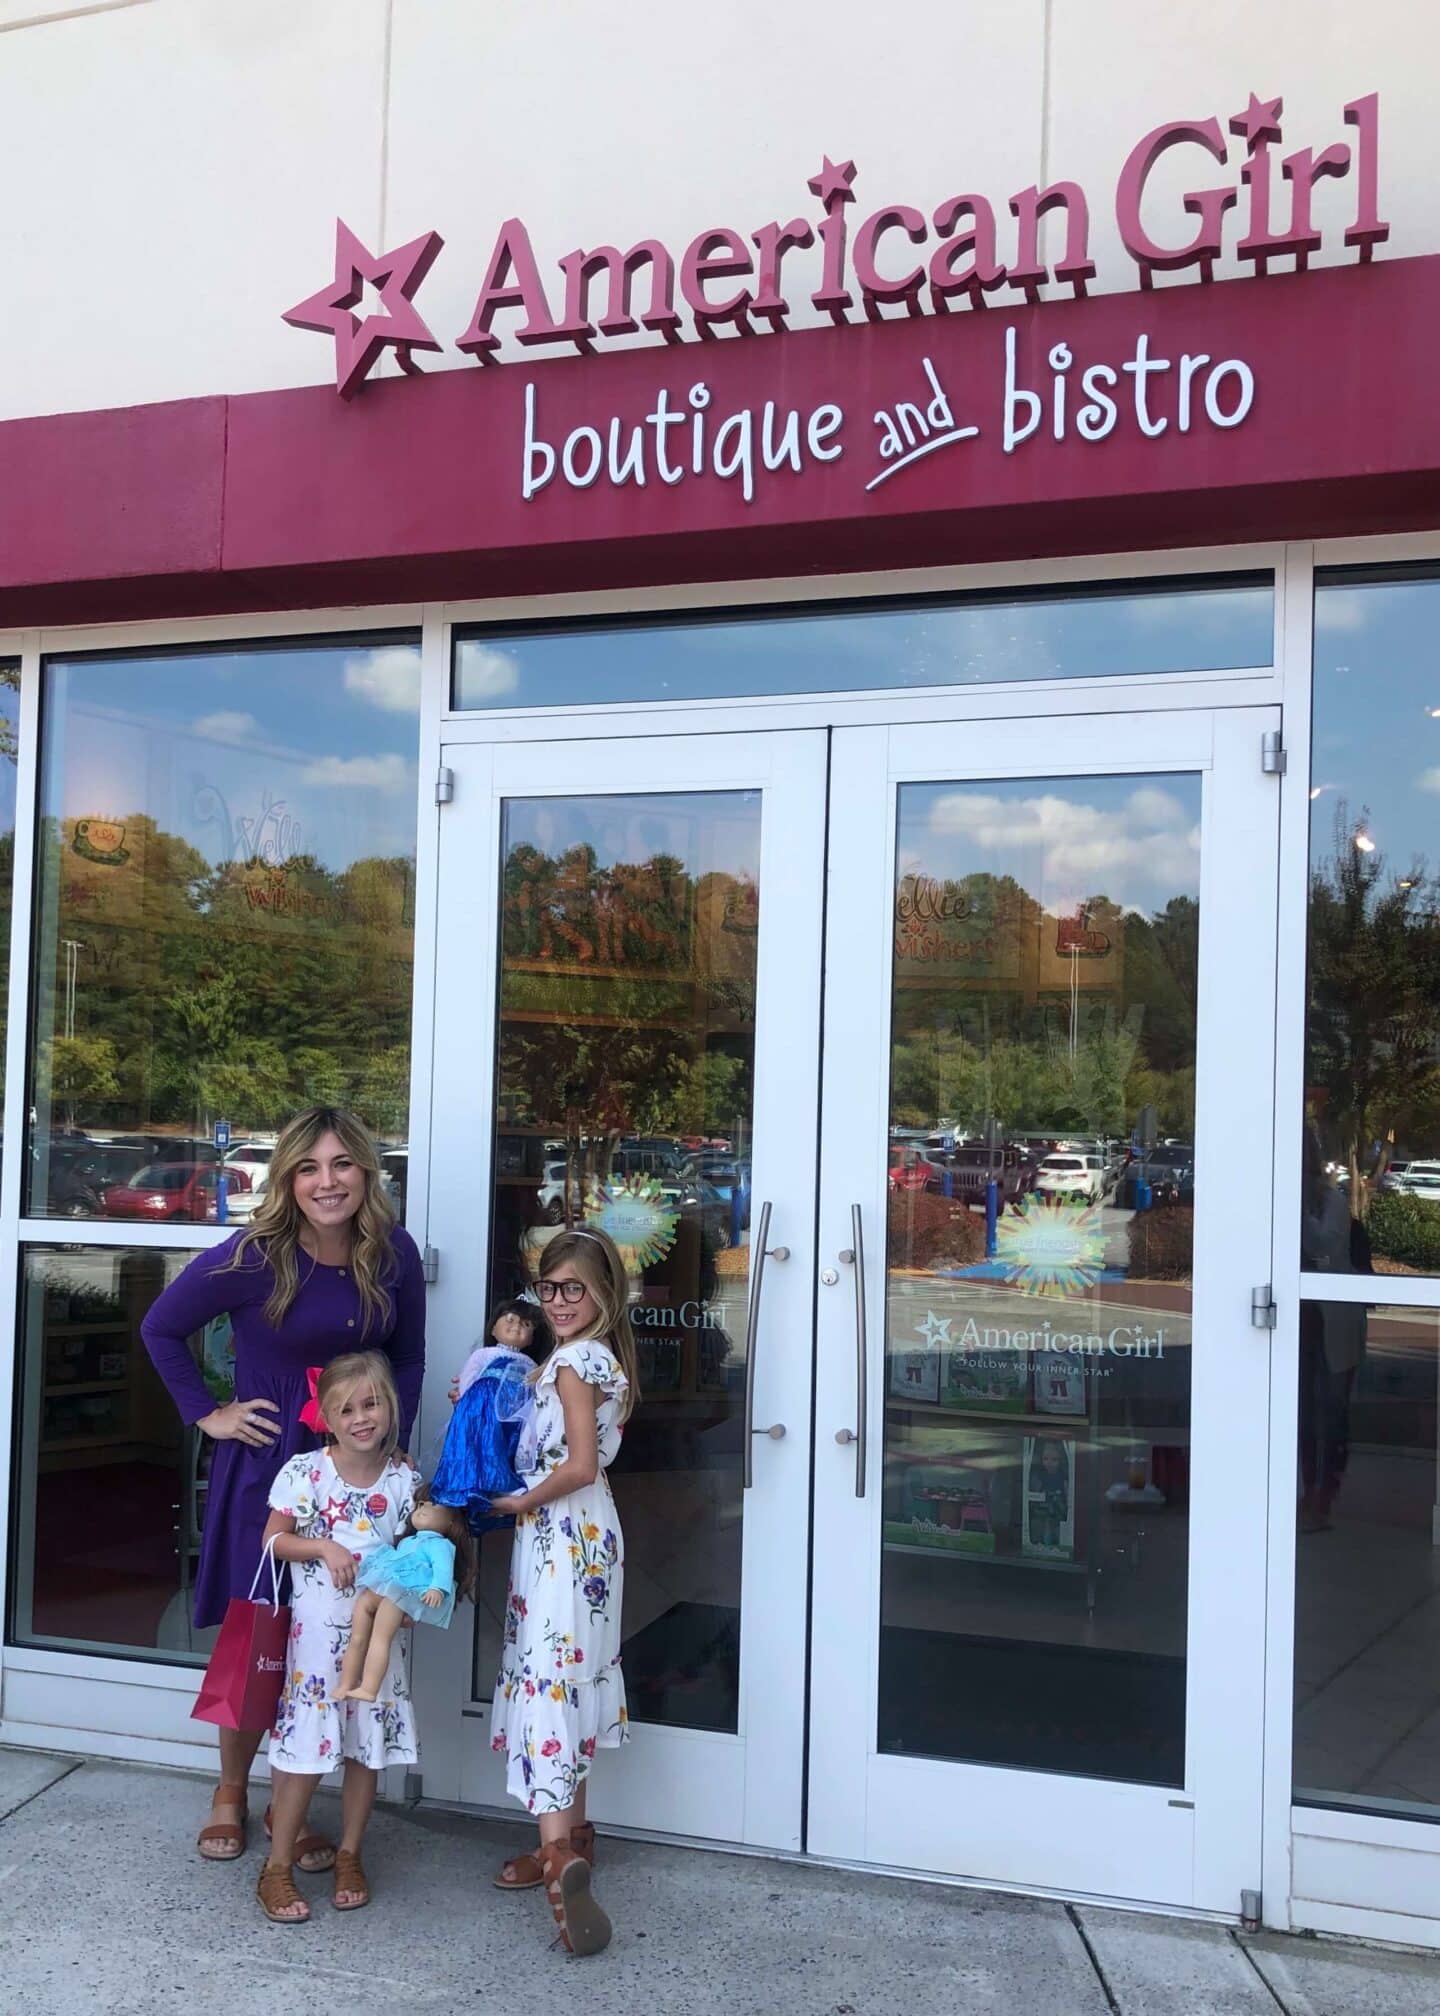 American girl doll boutique and bistro